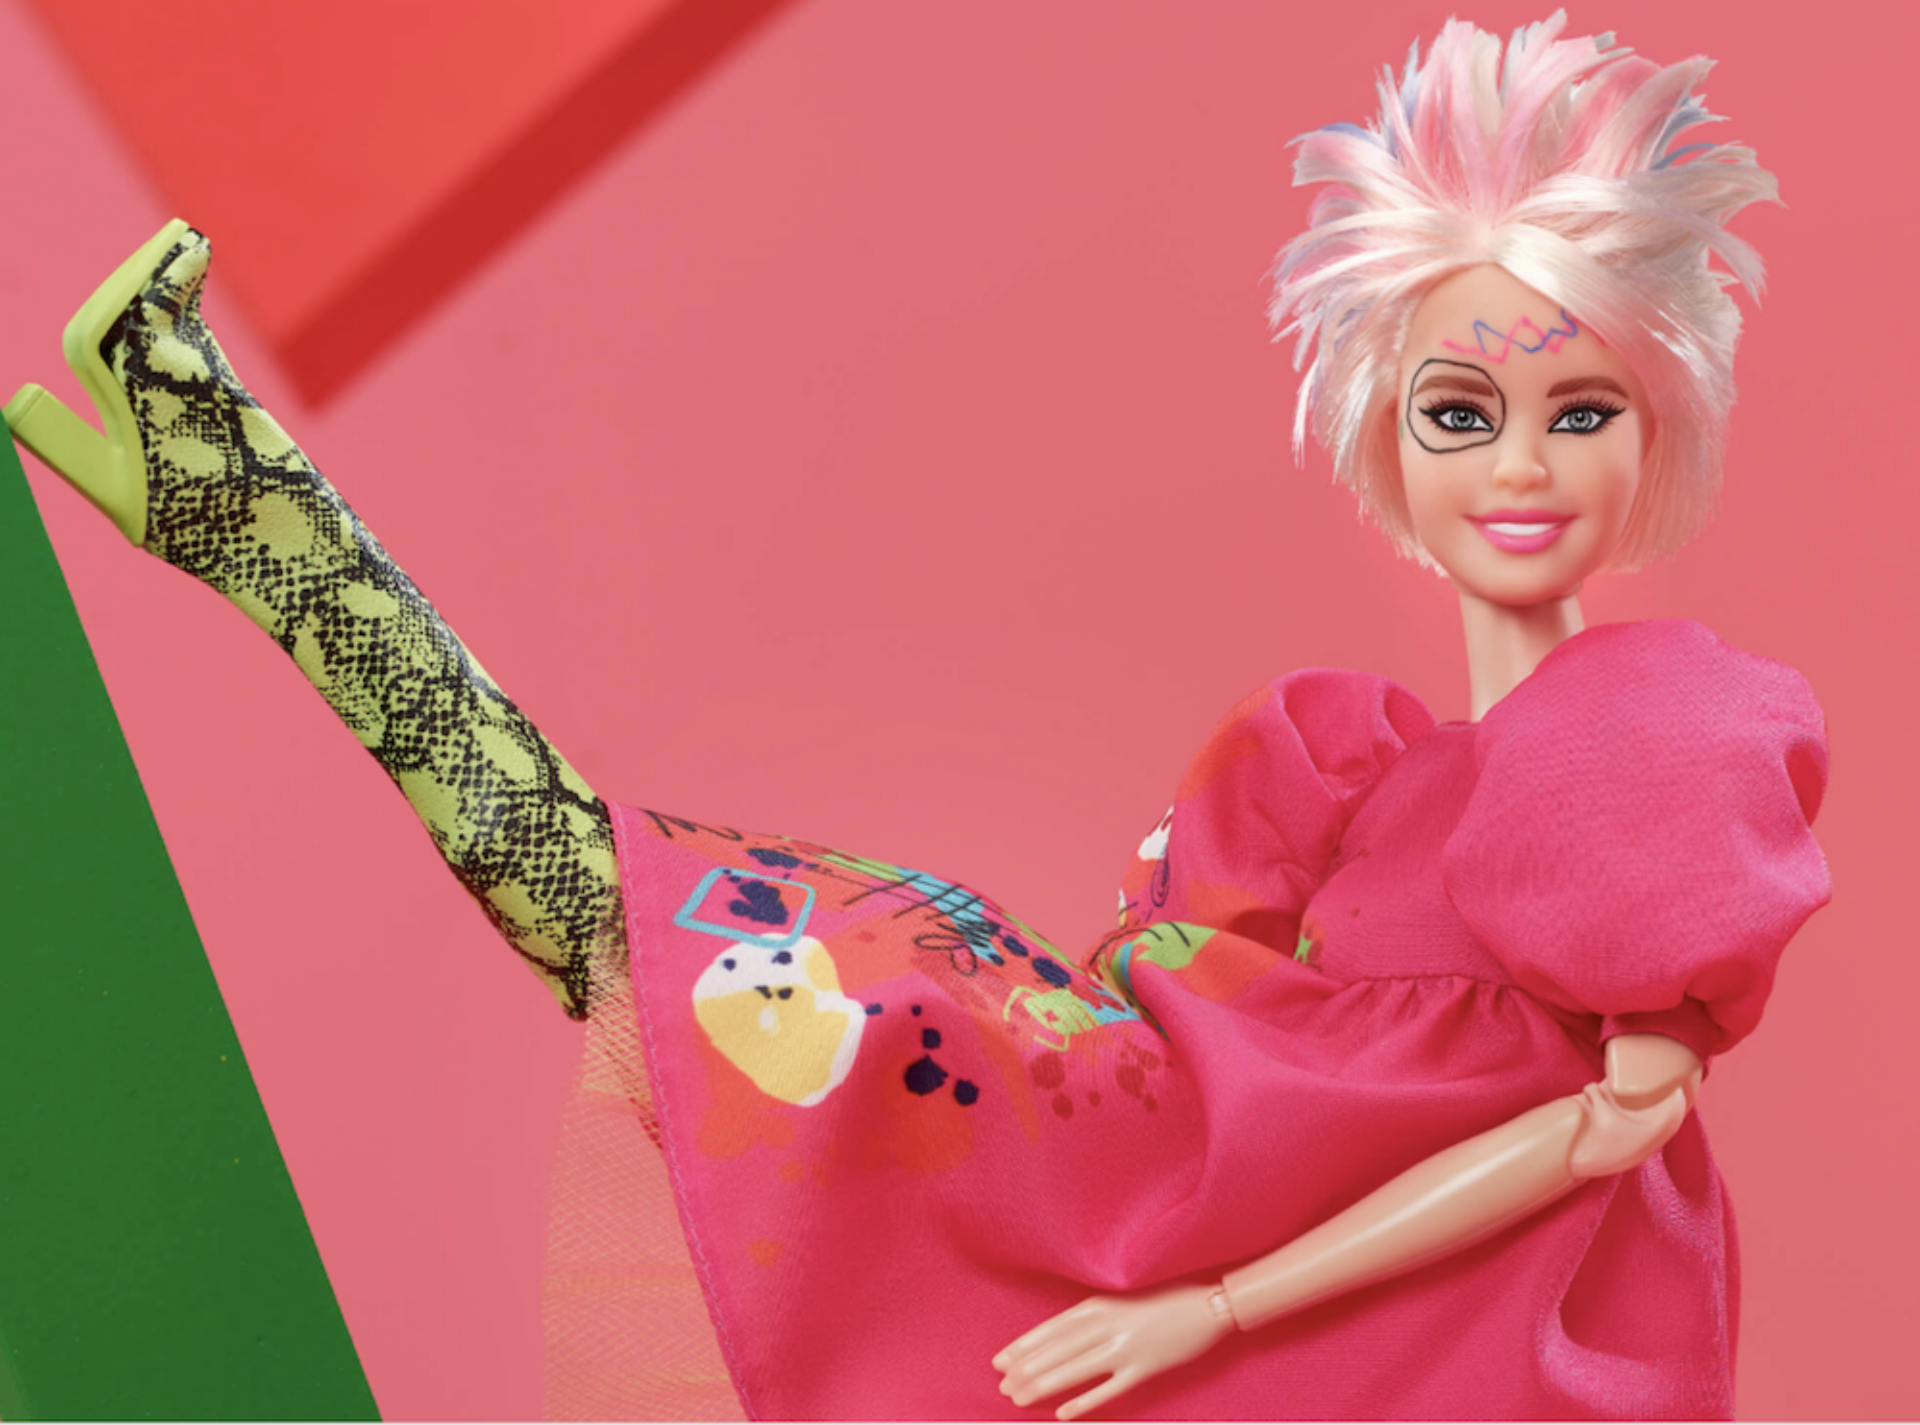 Mattel has launched a brand new doll inspired by Kate McKinnon's character Weird Barbie in the popular Barbie movie.